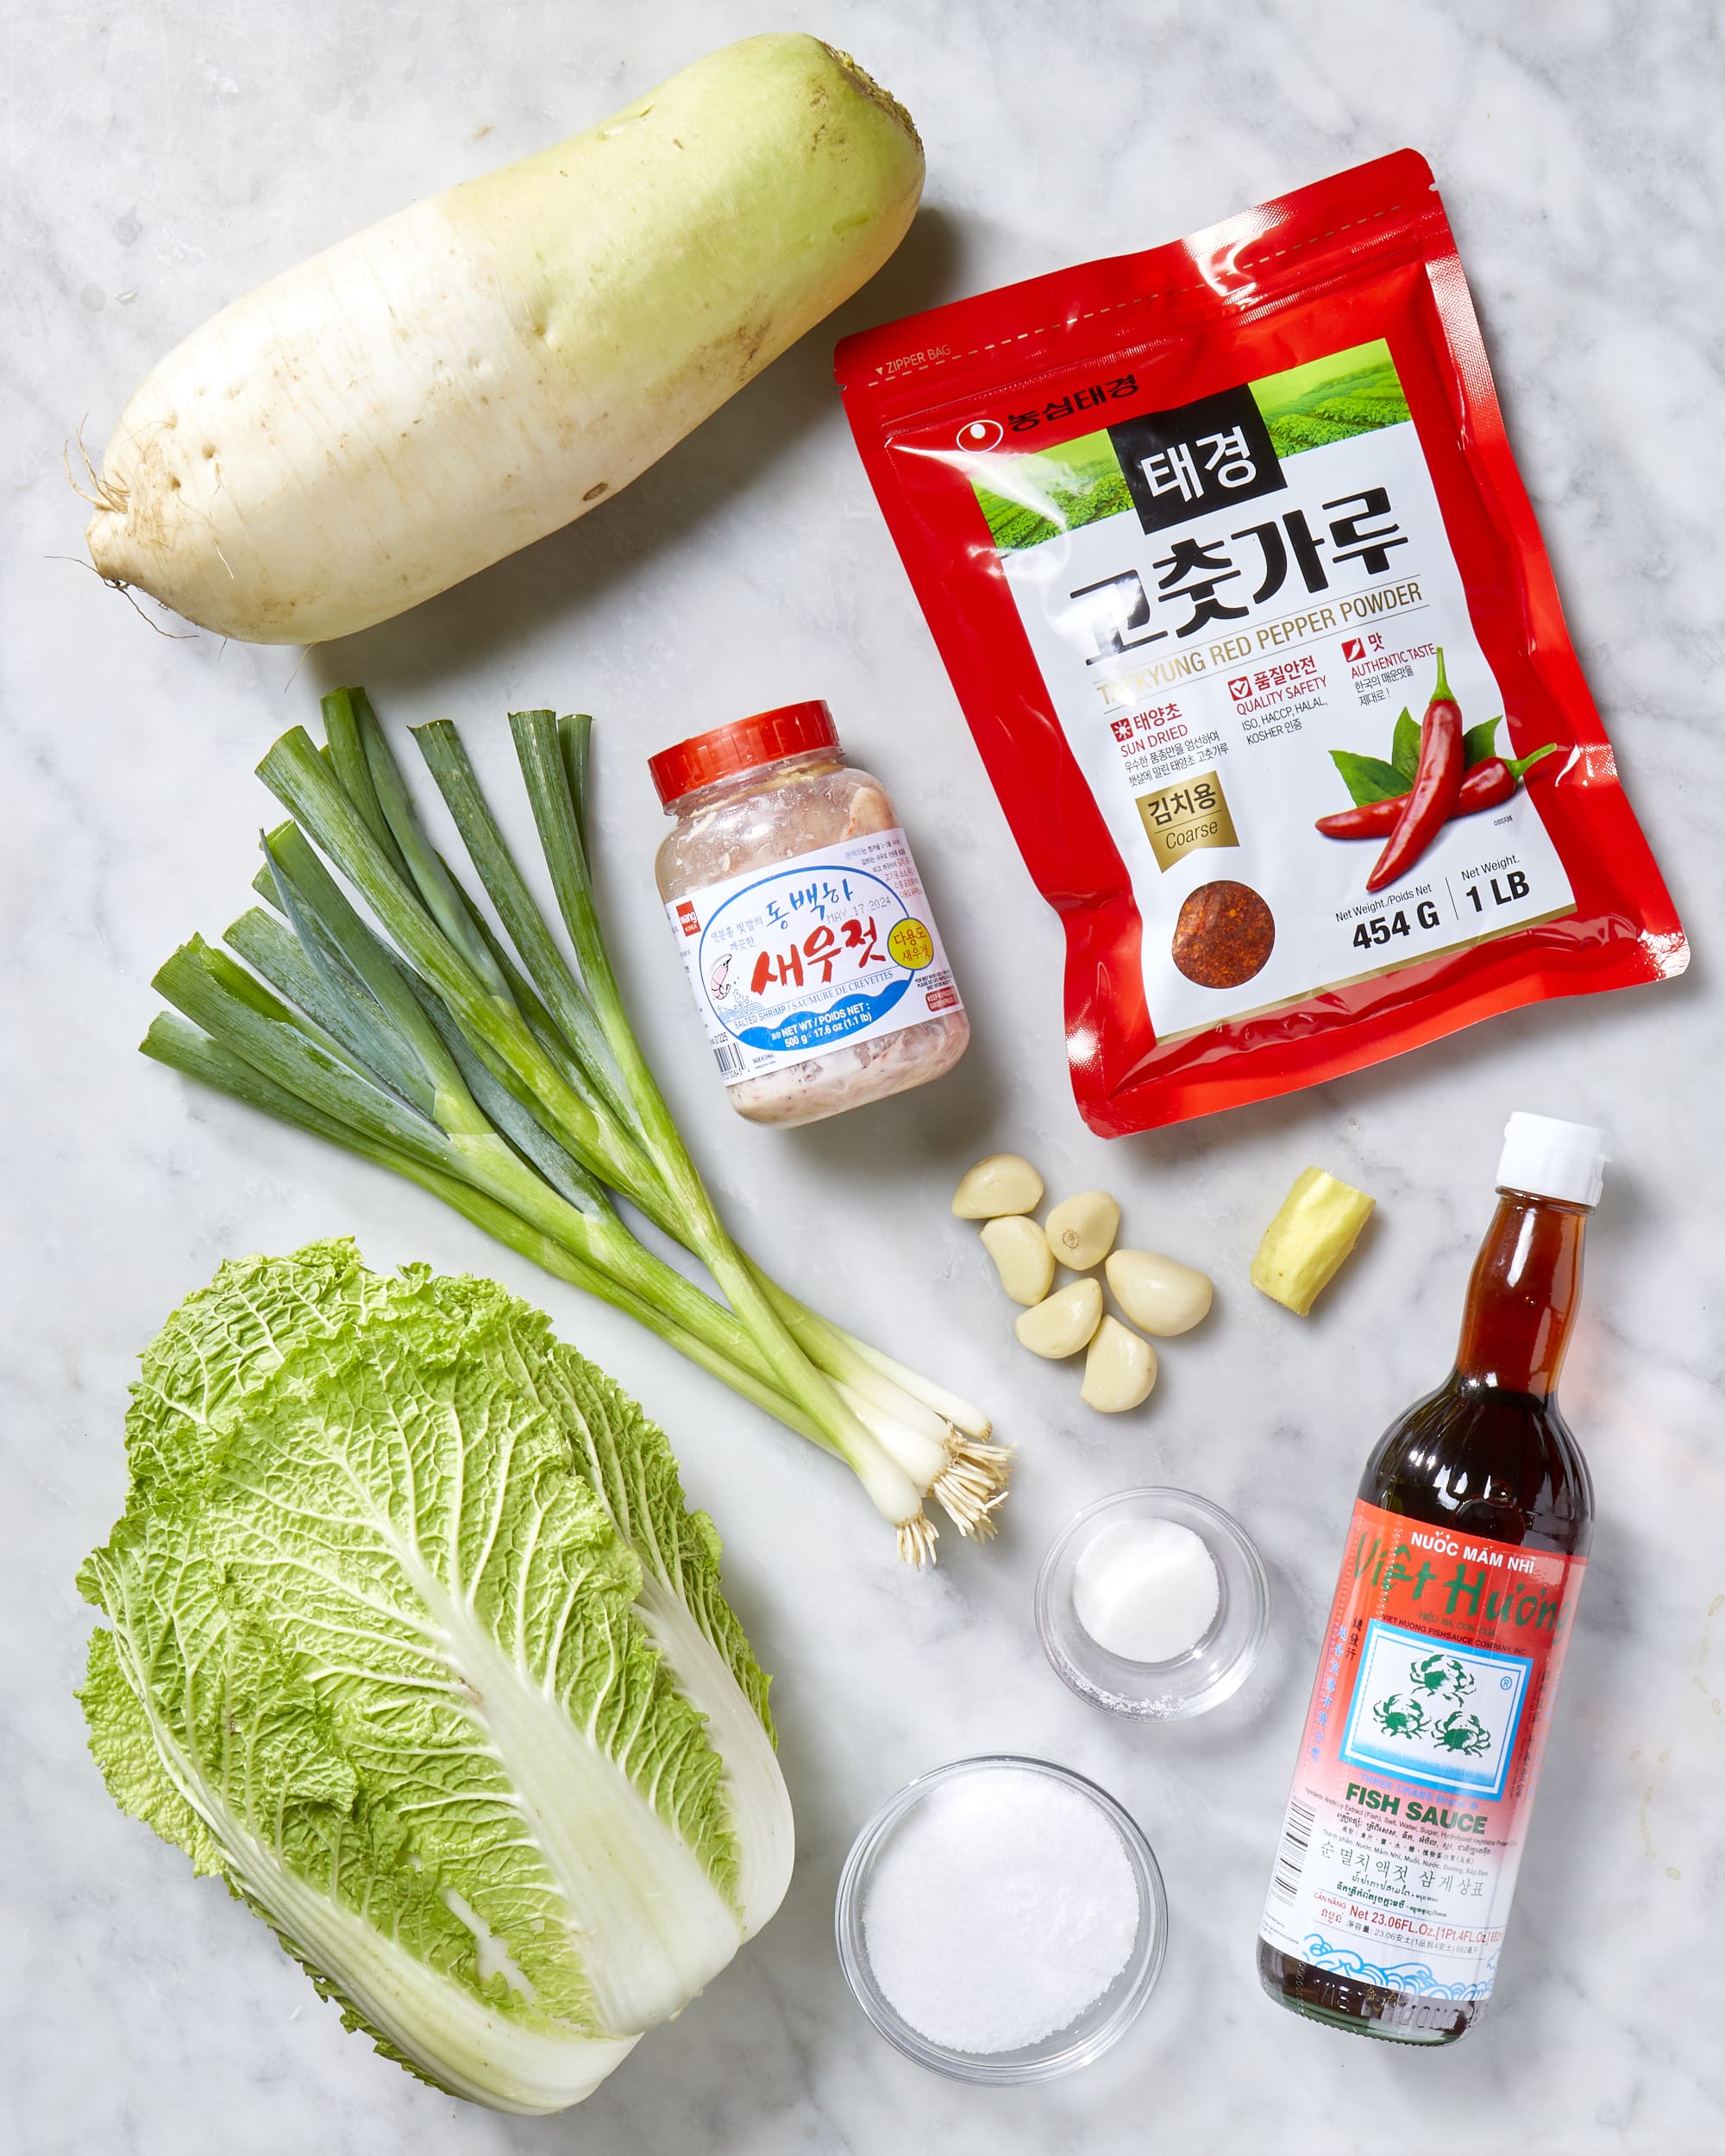 How hardworking microbes ferment cabbage into kimchi